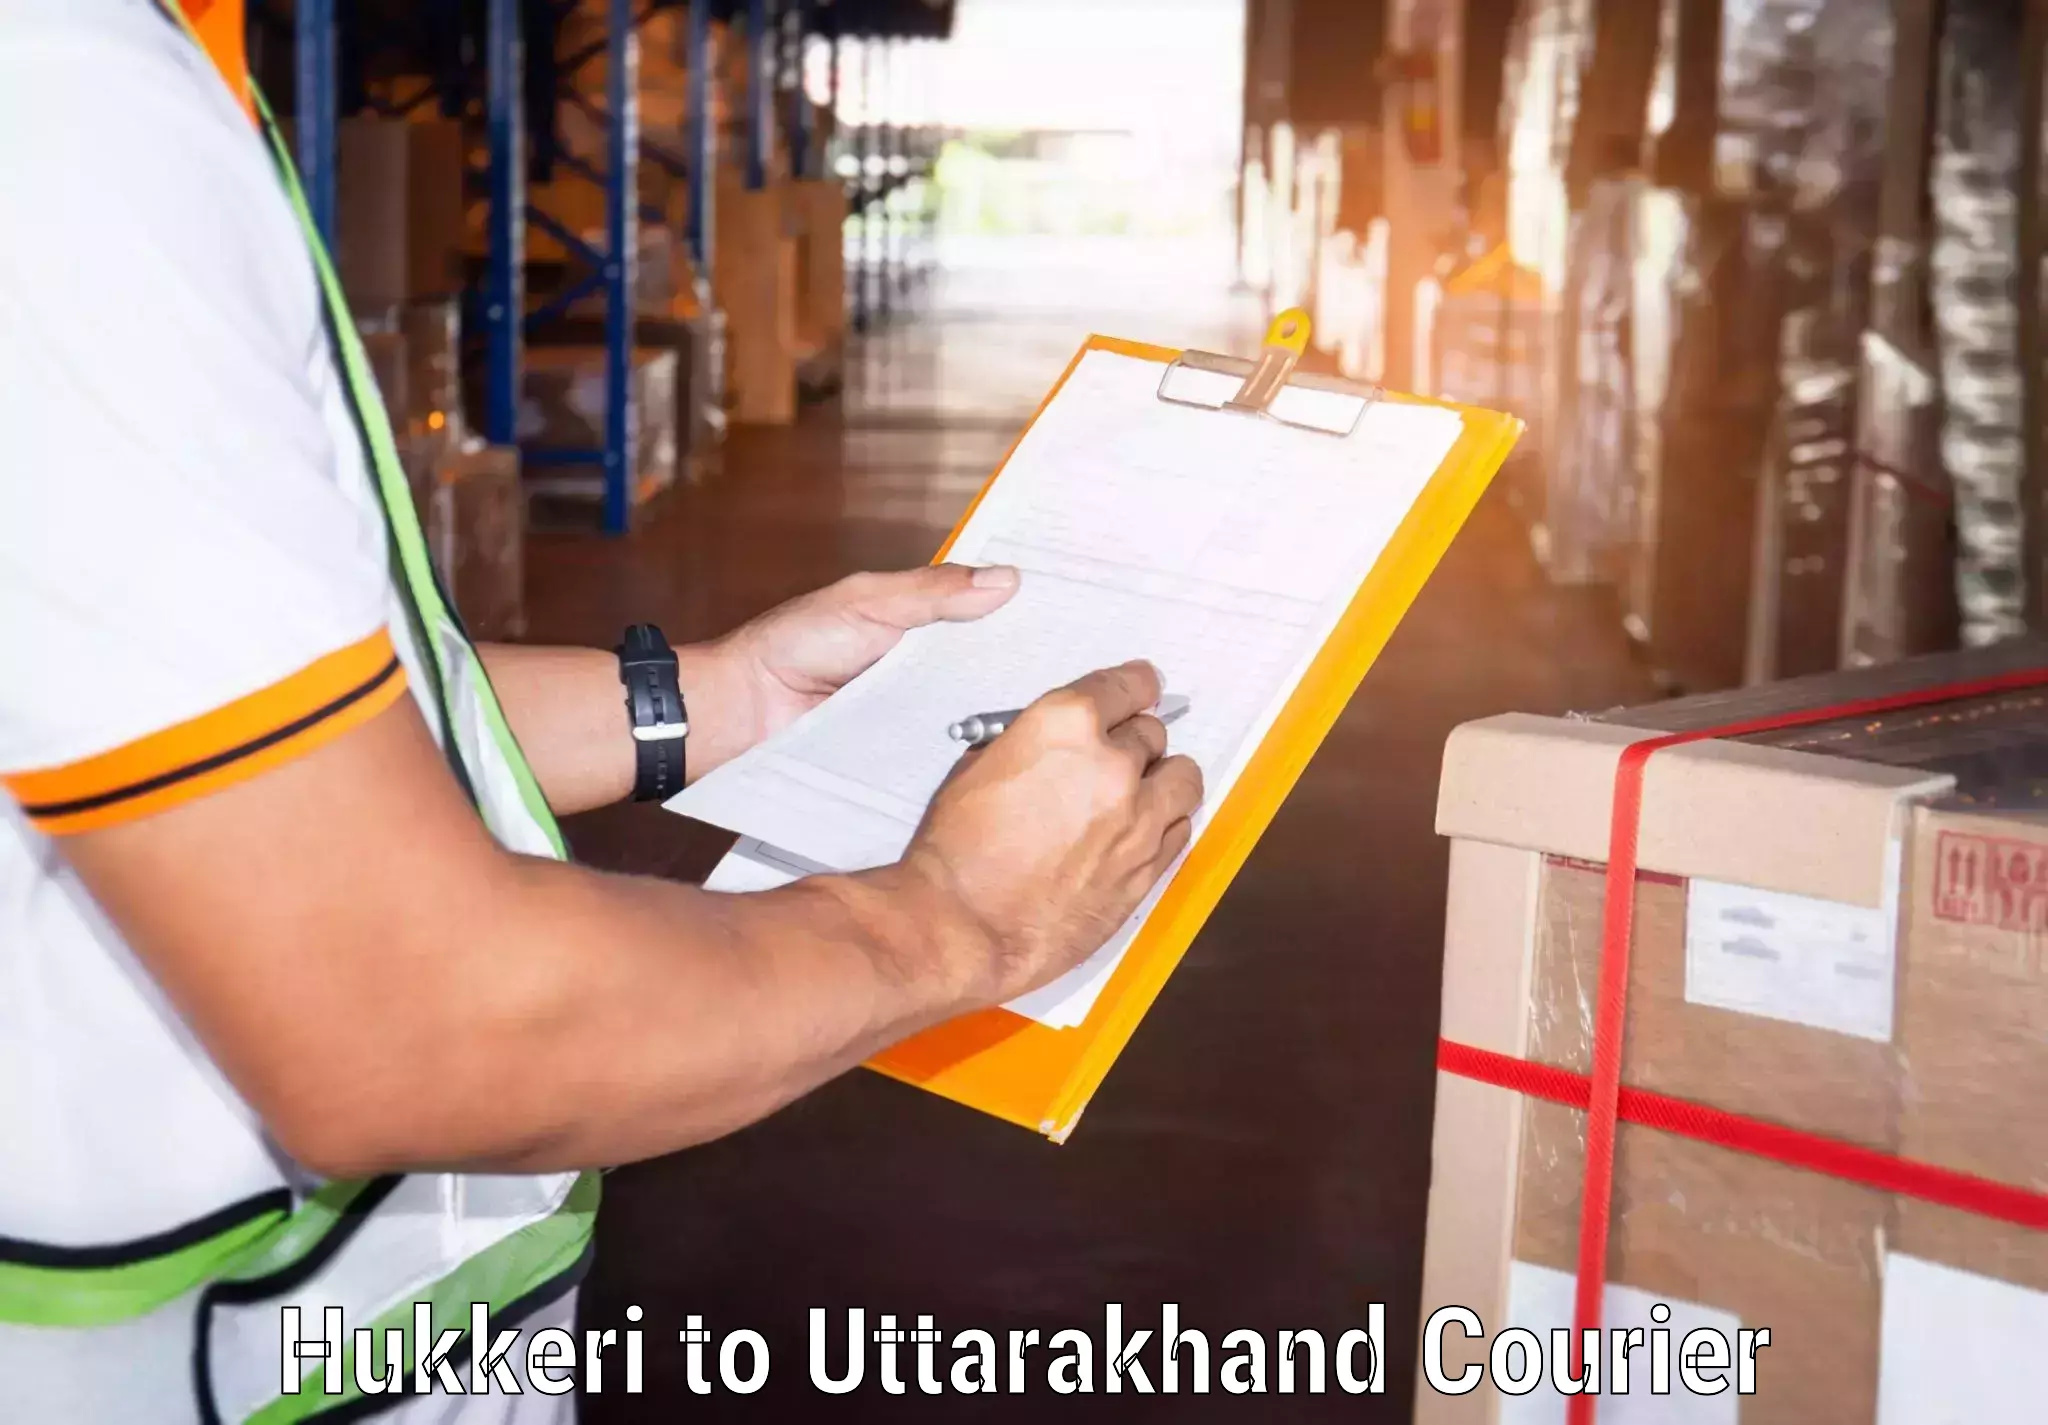 State-of-the-art courier technology Hukkeri to Almora